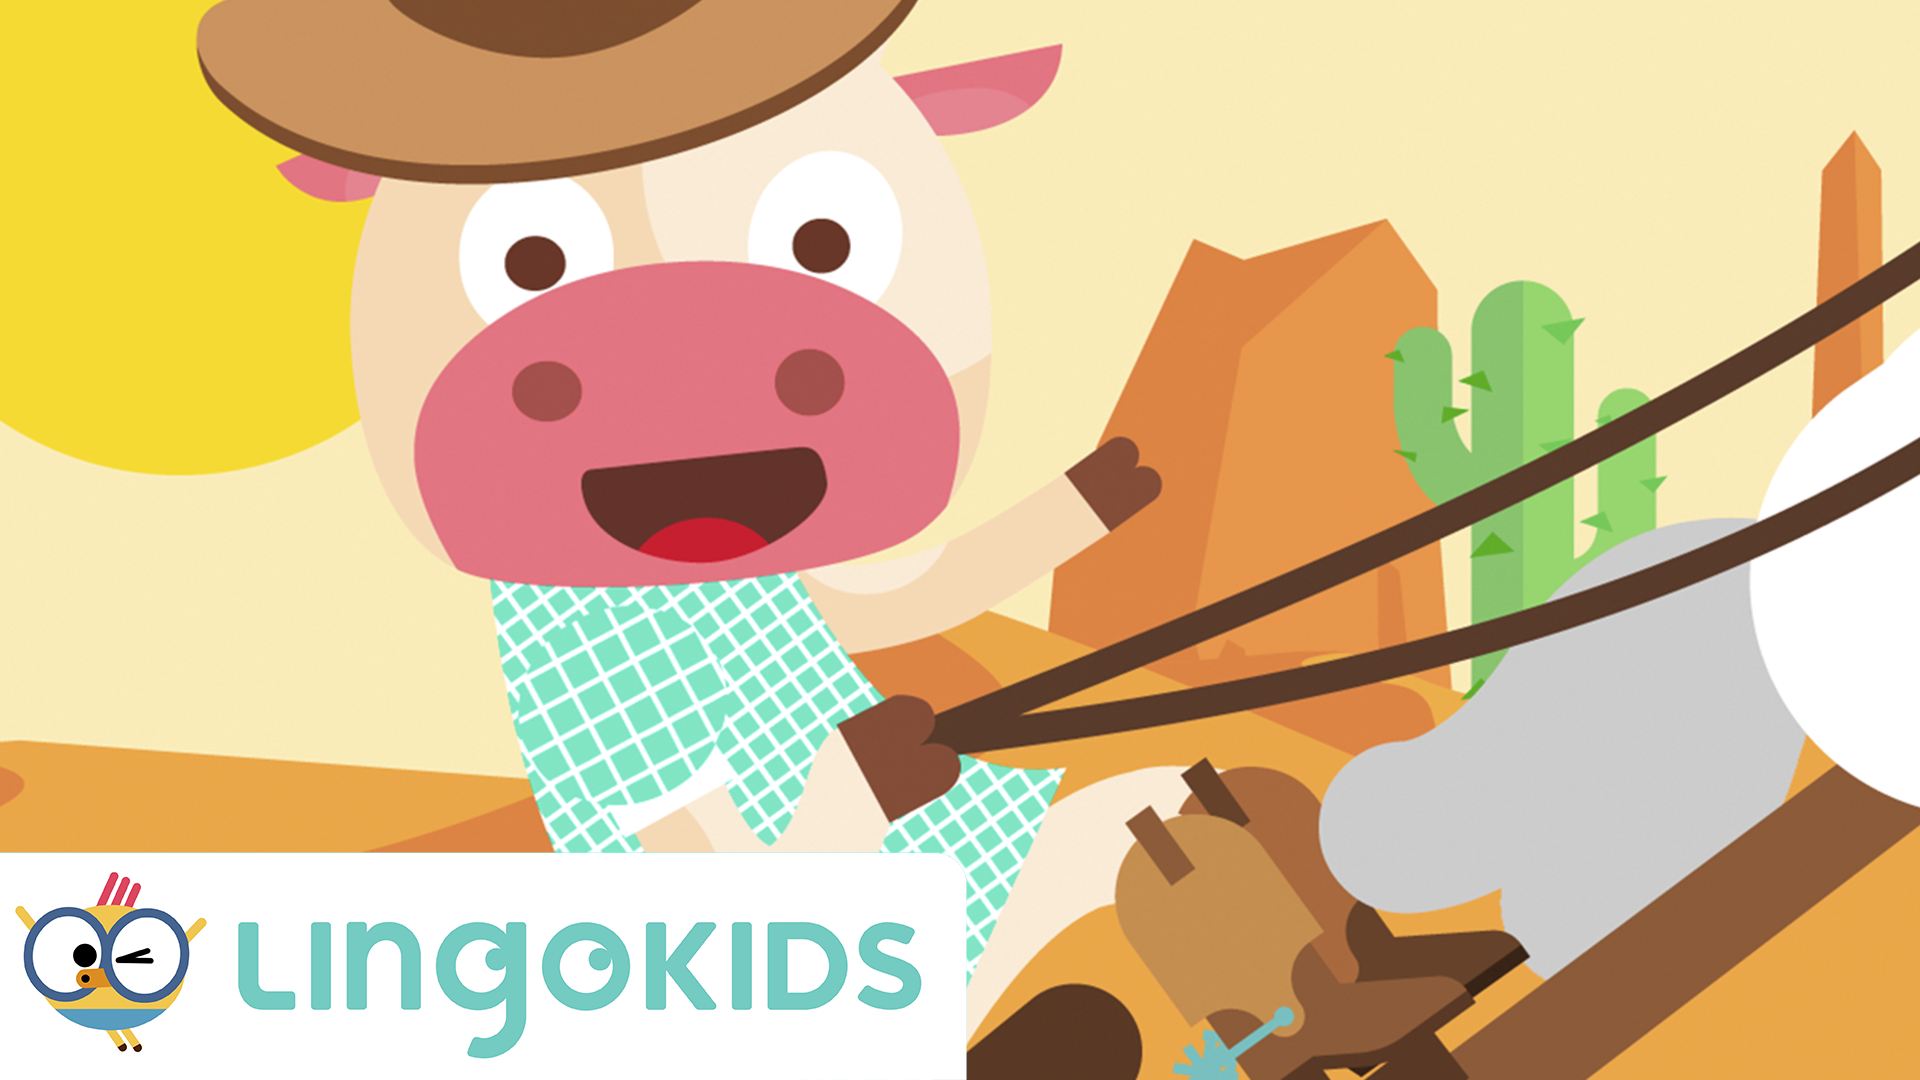 Lingokids игры. Lingokids Songs for Kids English. Shell be coming Round the Mountain. Mountain Nursery Rhymes.